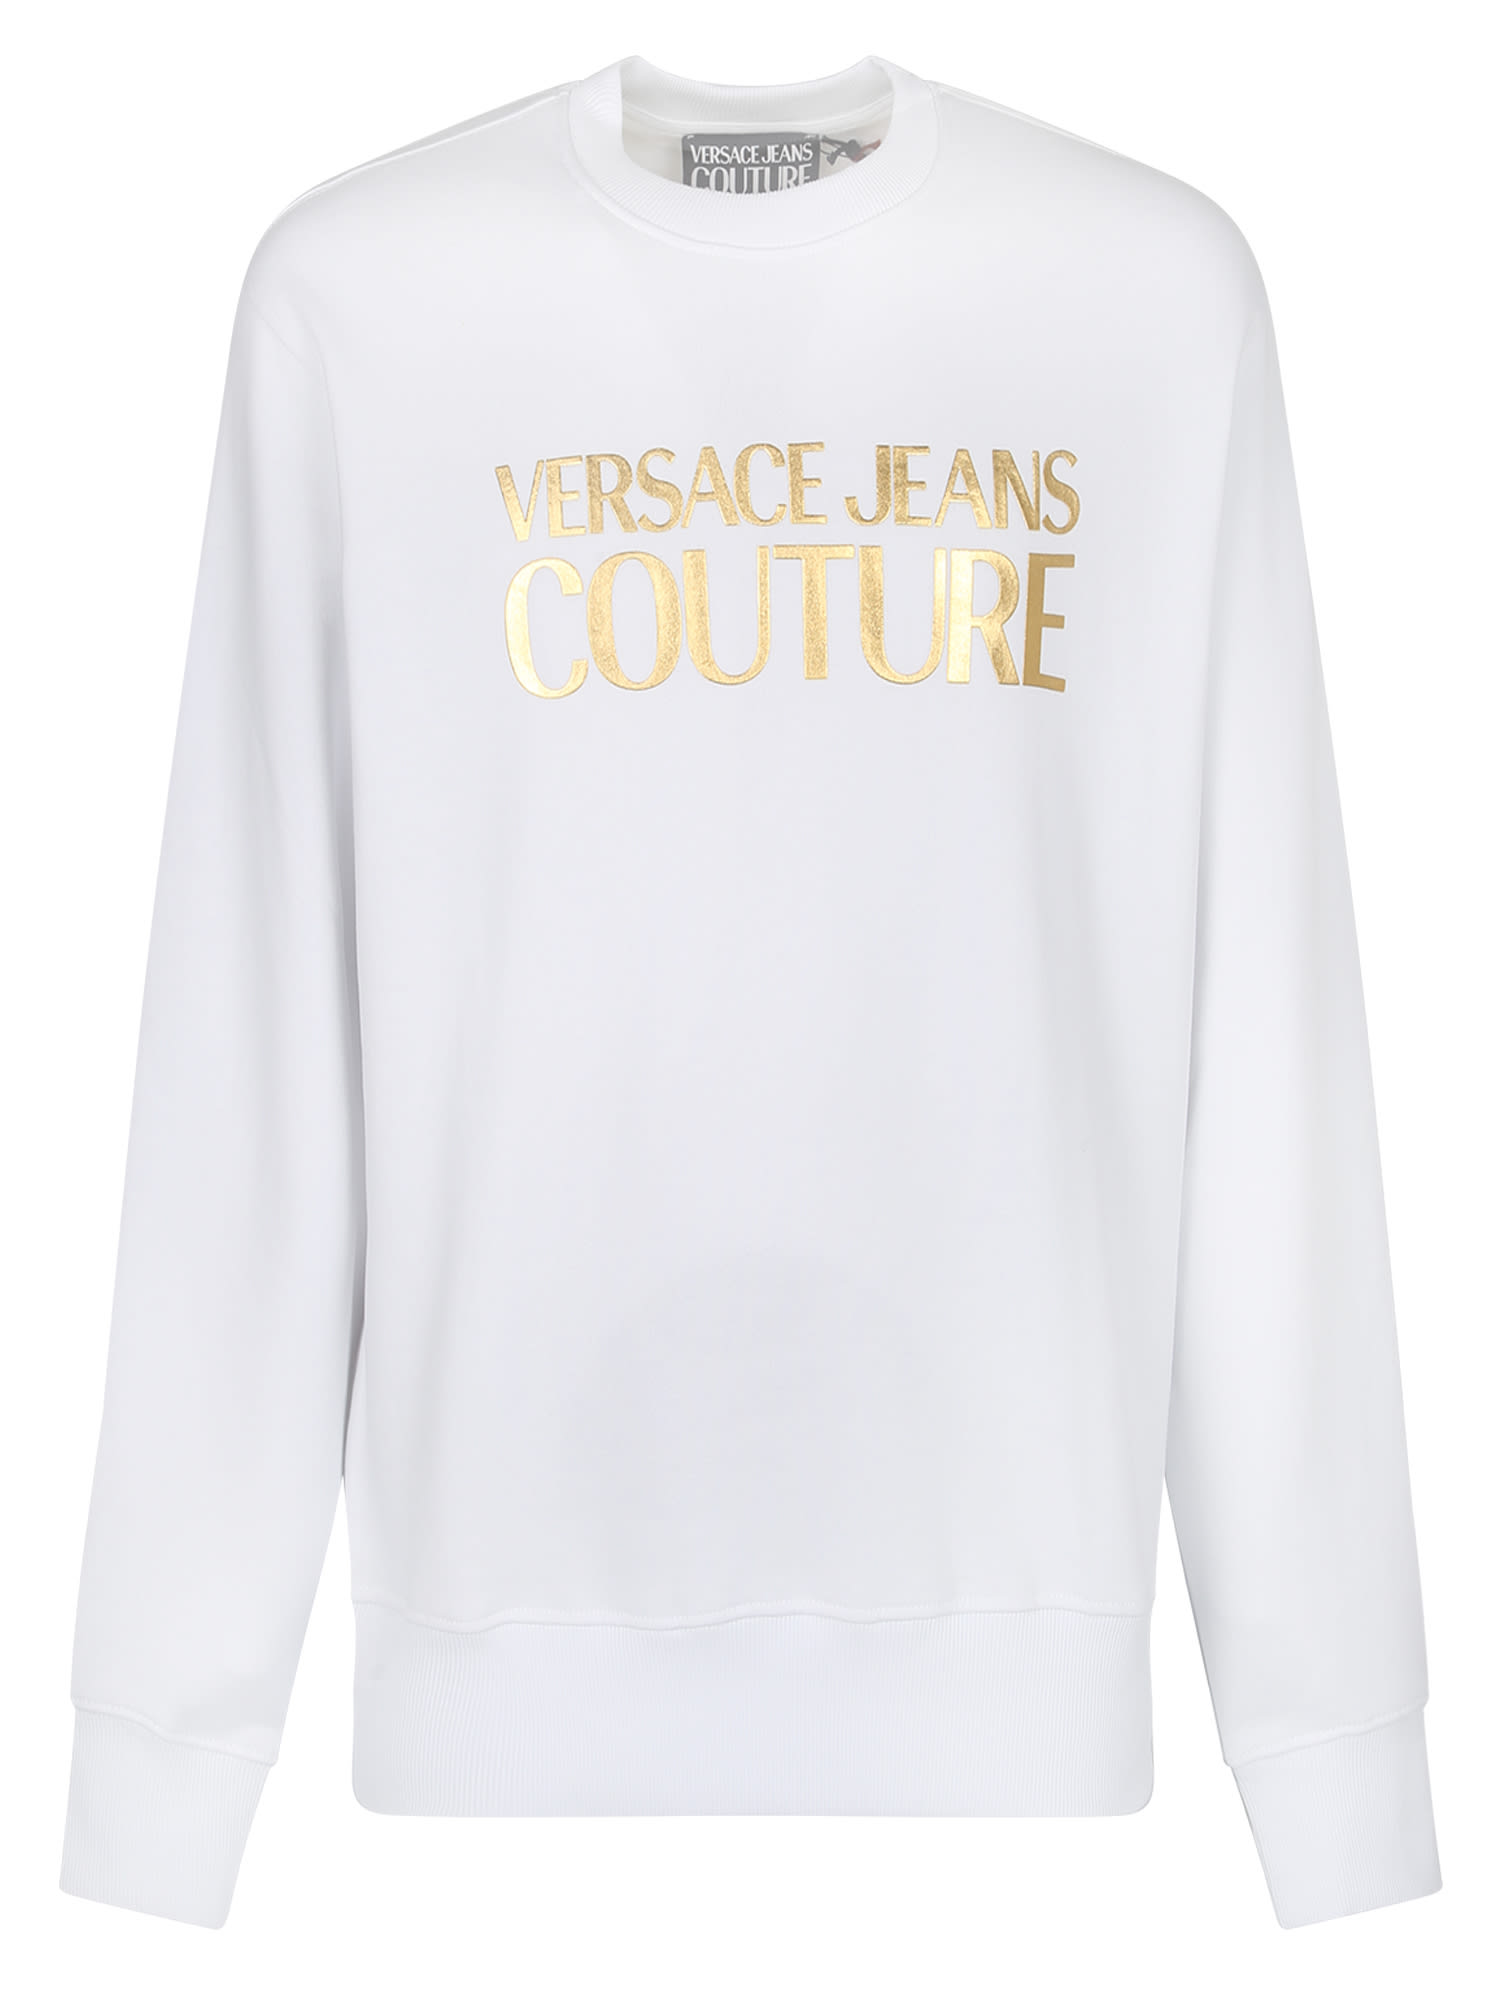 Versace Jeans Couture Relaxed Fit Sweatshirt